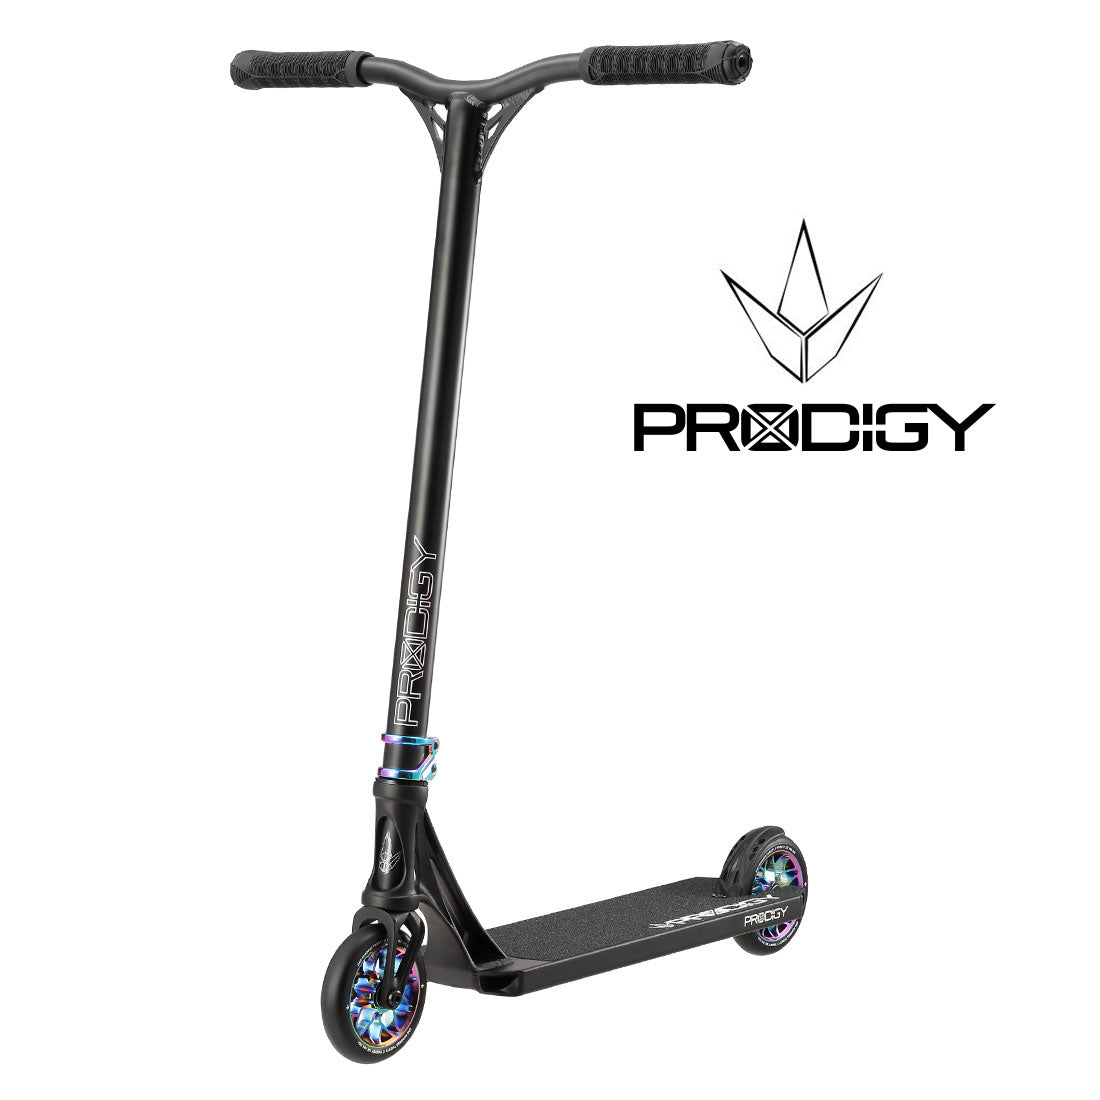 Envy Prodigy X Complete - Black/Oil Slick Scooter Completes Trick